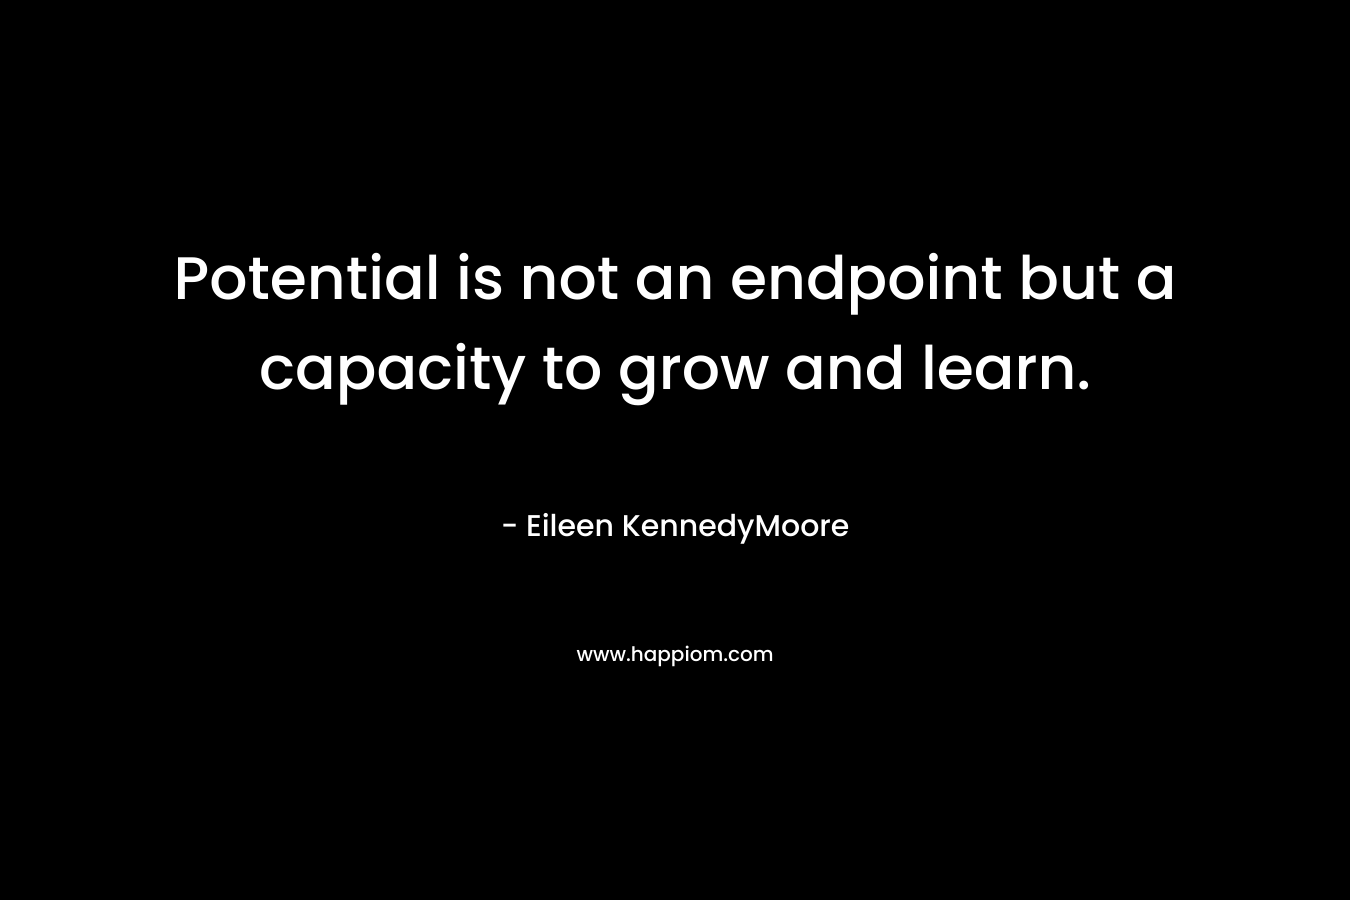 Potential is not an endpoint but a capacity to grow and learn.